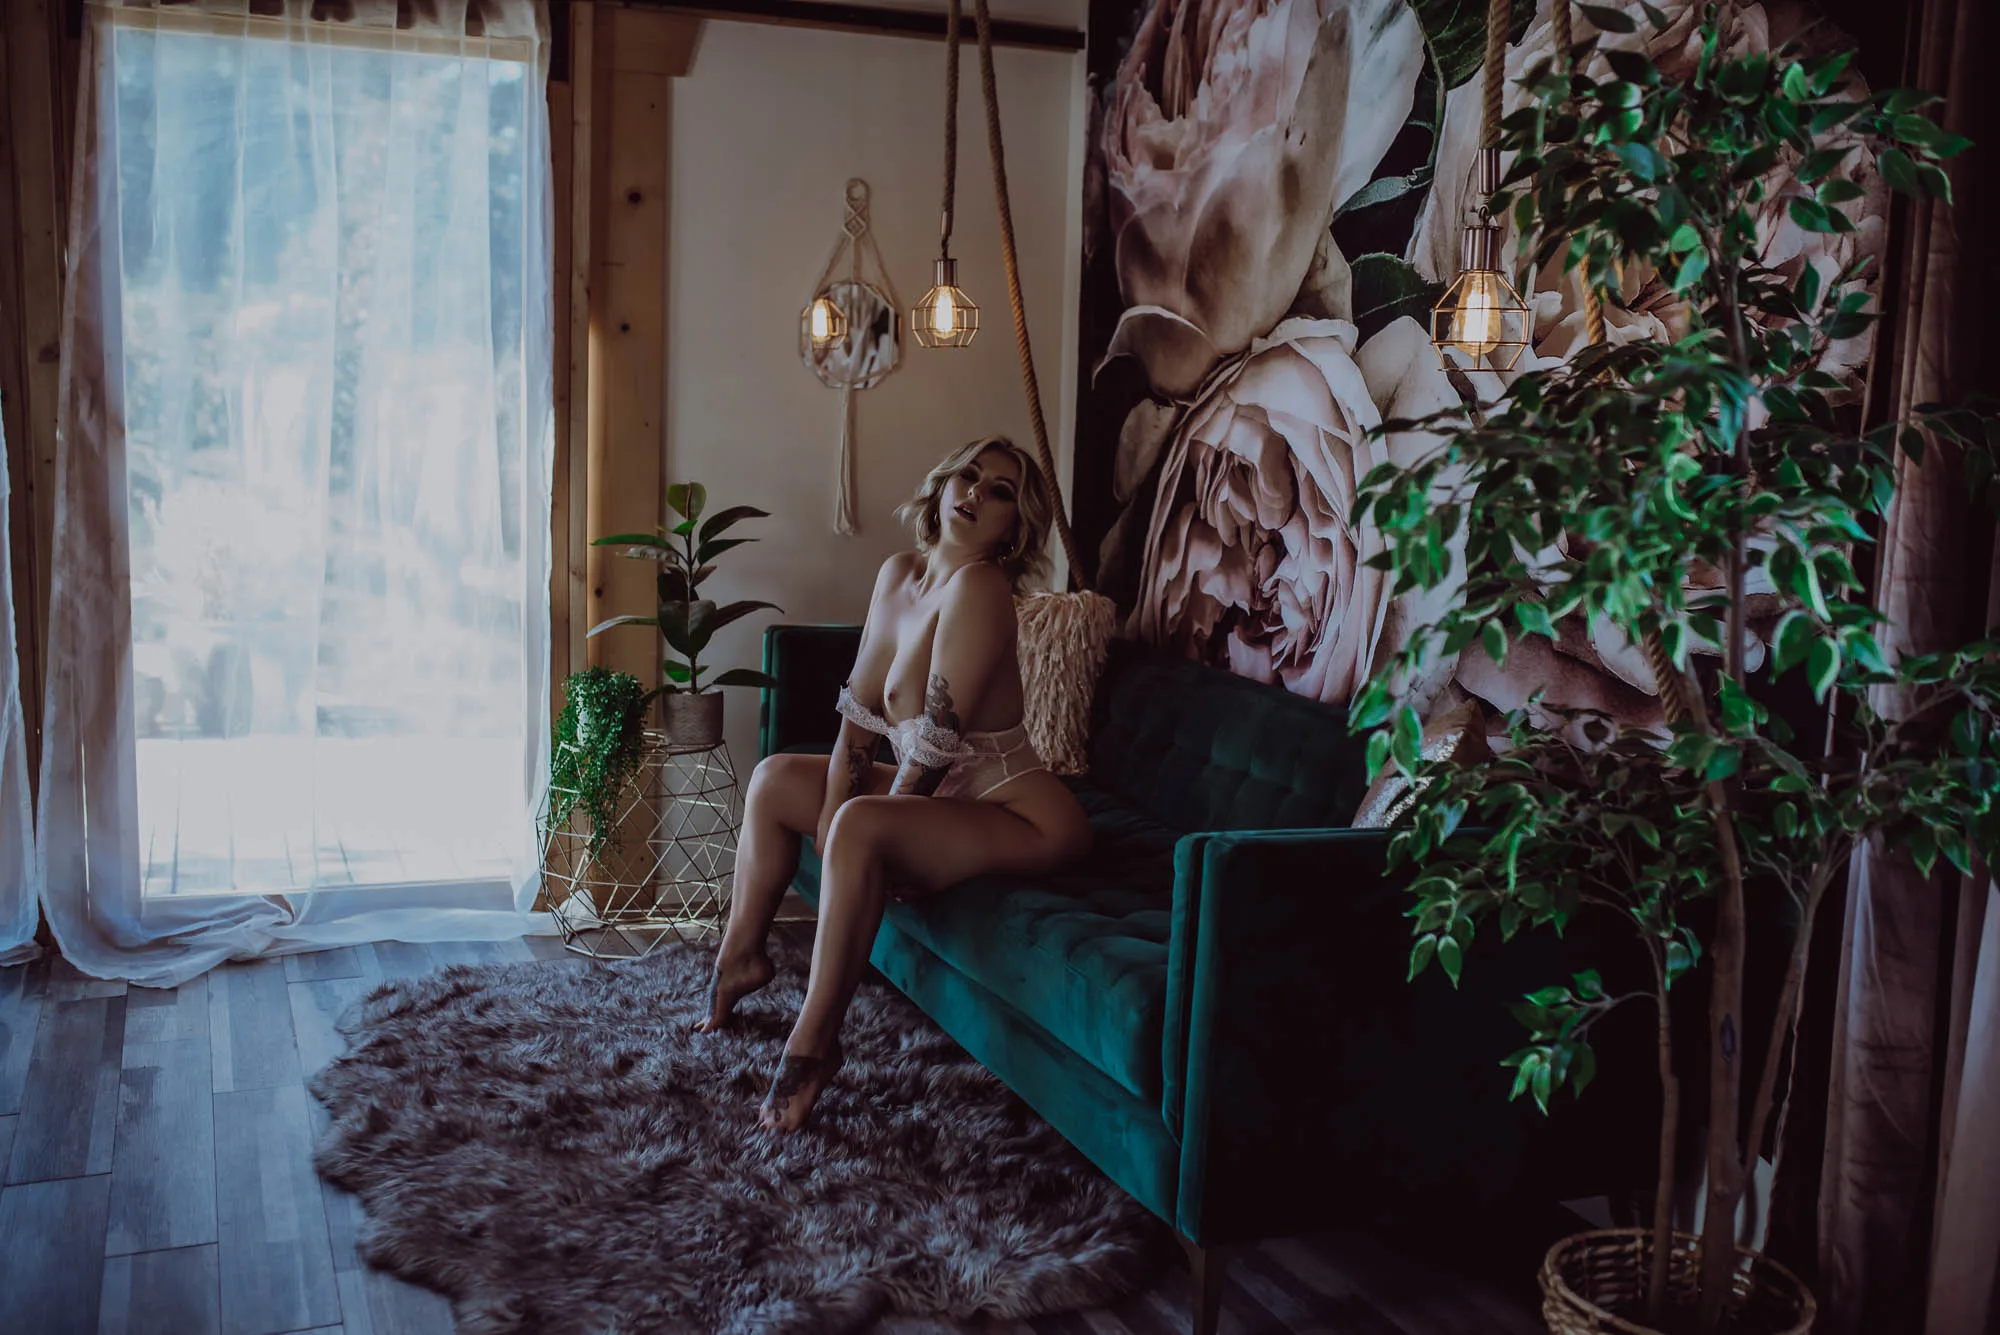 Behind the scenes of a boudoir photoshoot: what to expect on the day of your session with Melisa Ford Boudoir.